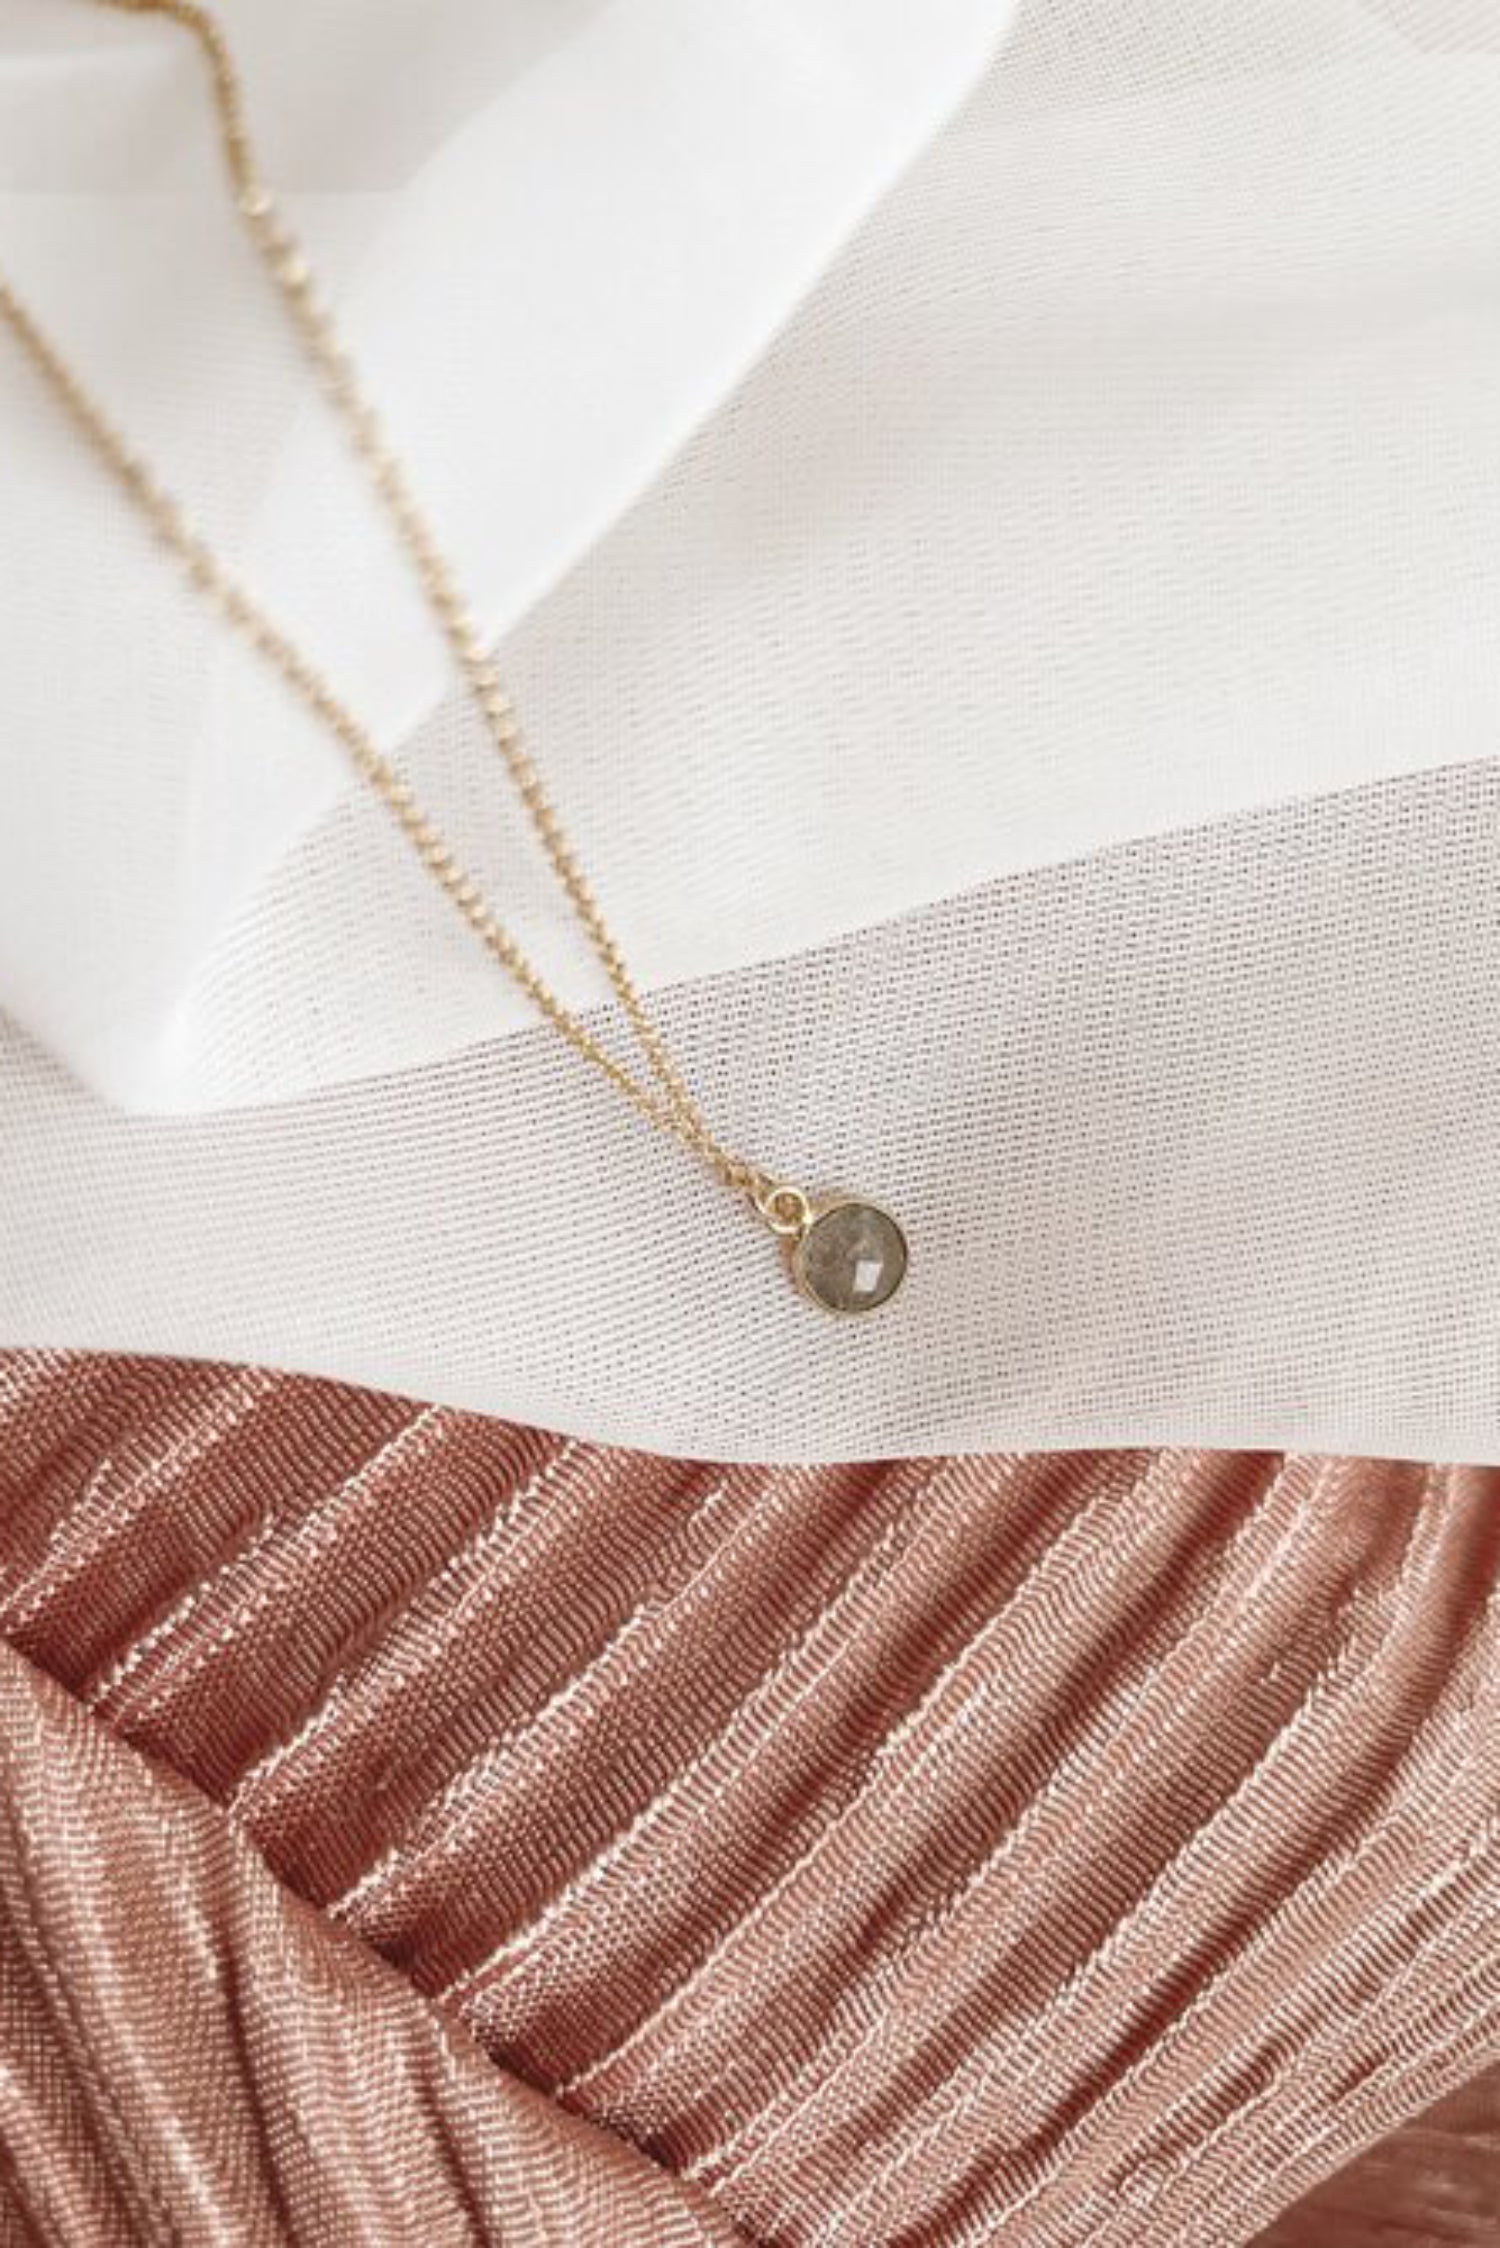 Mini Gem Necklace by Katye Landry, Moonstone, gold vermeil, 14k goldfill round cable chain, made in Ottawa